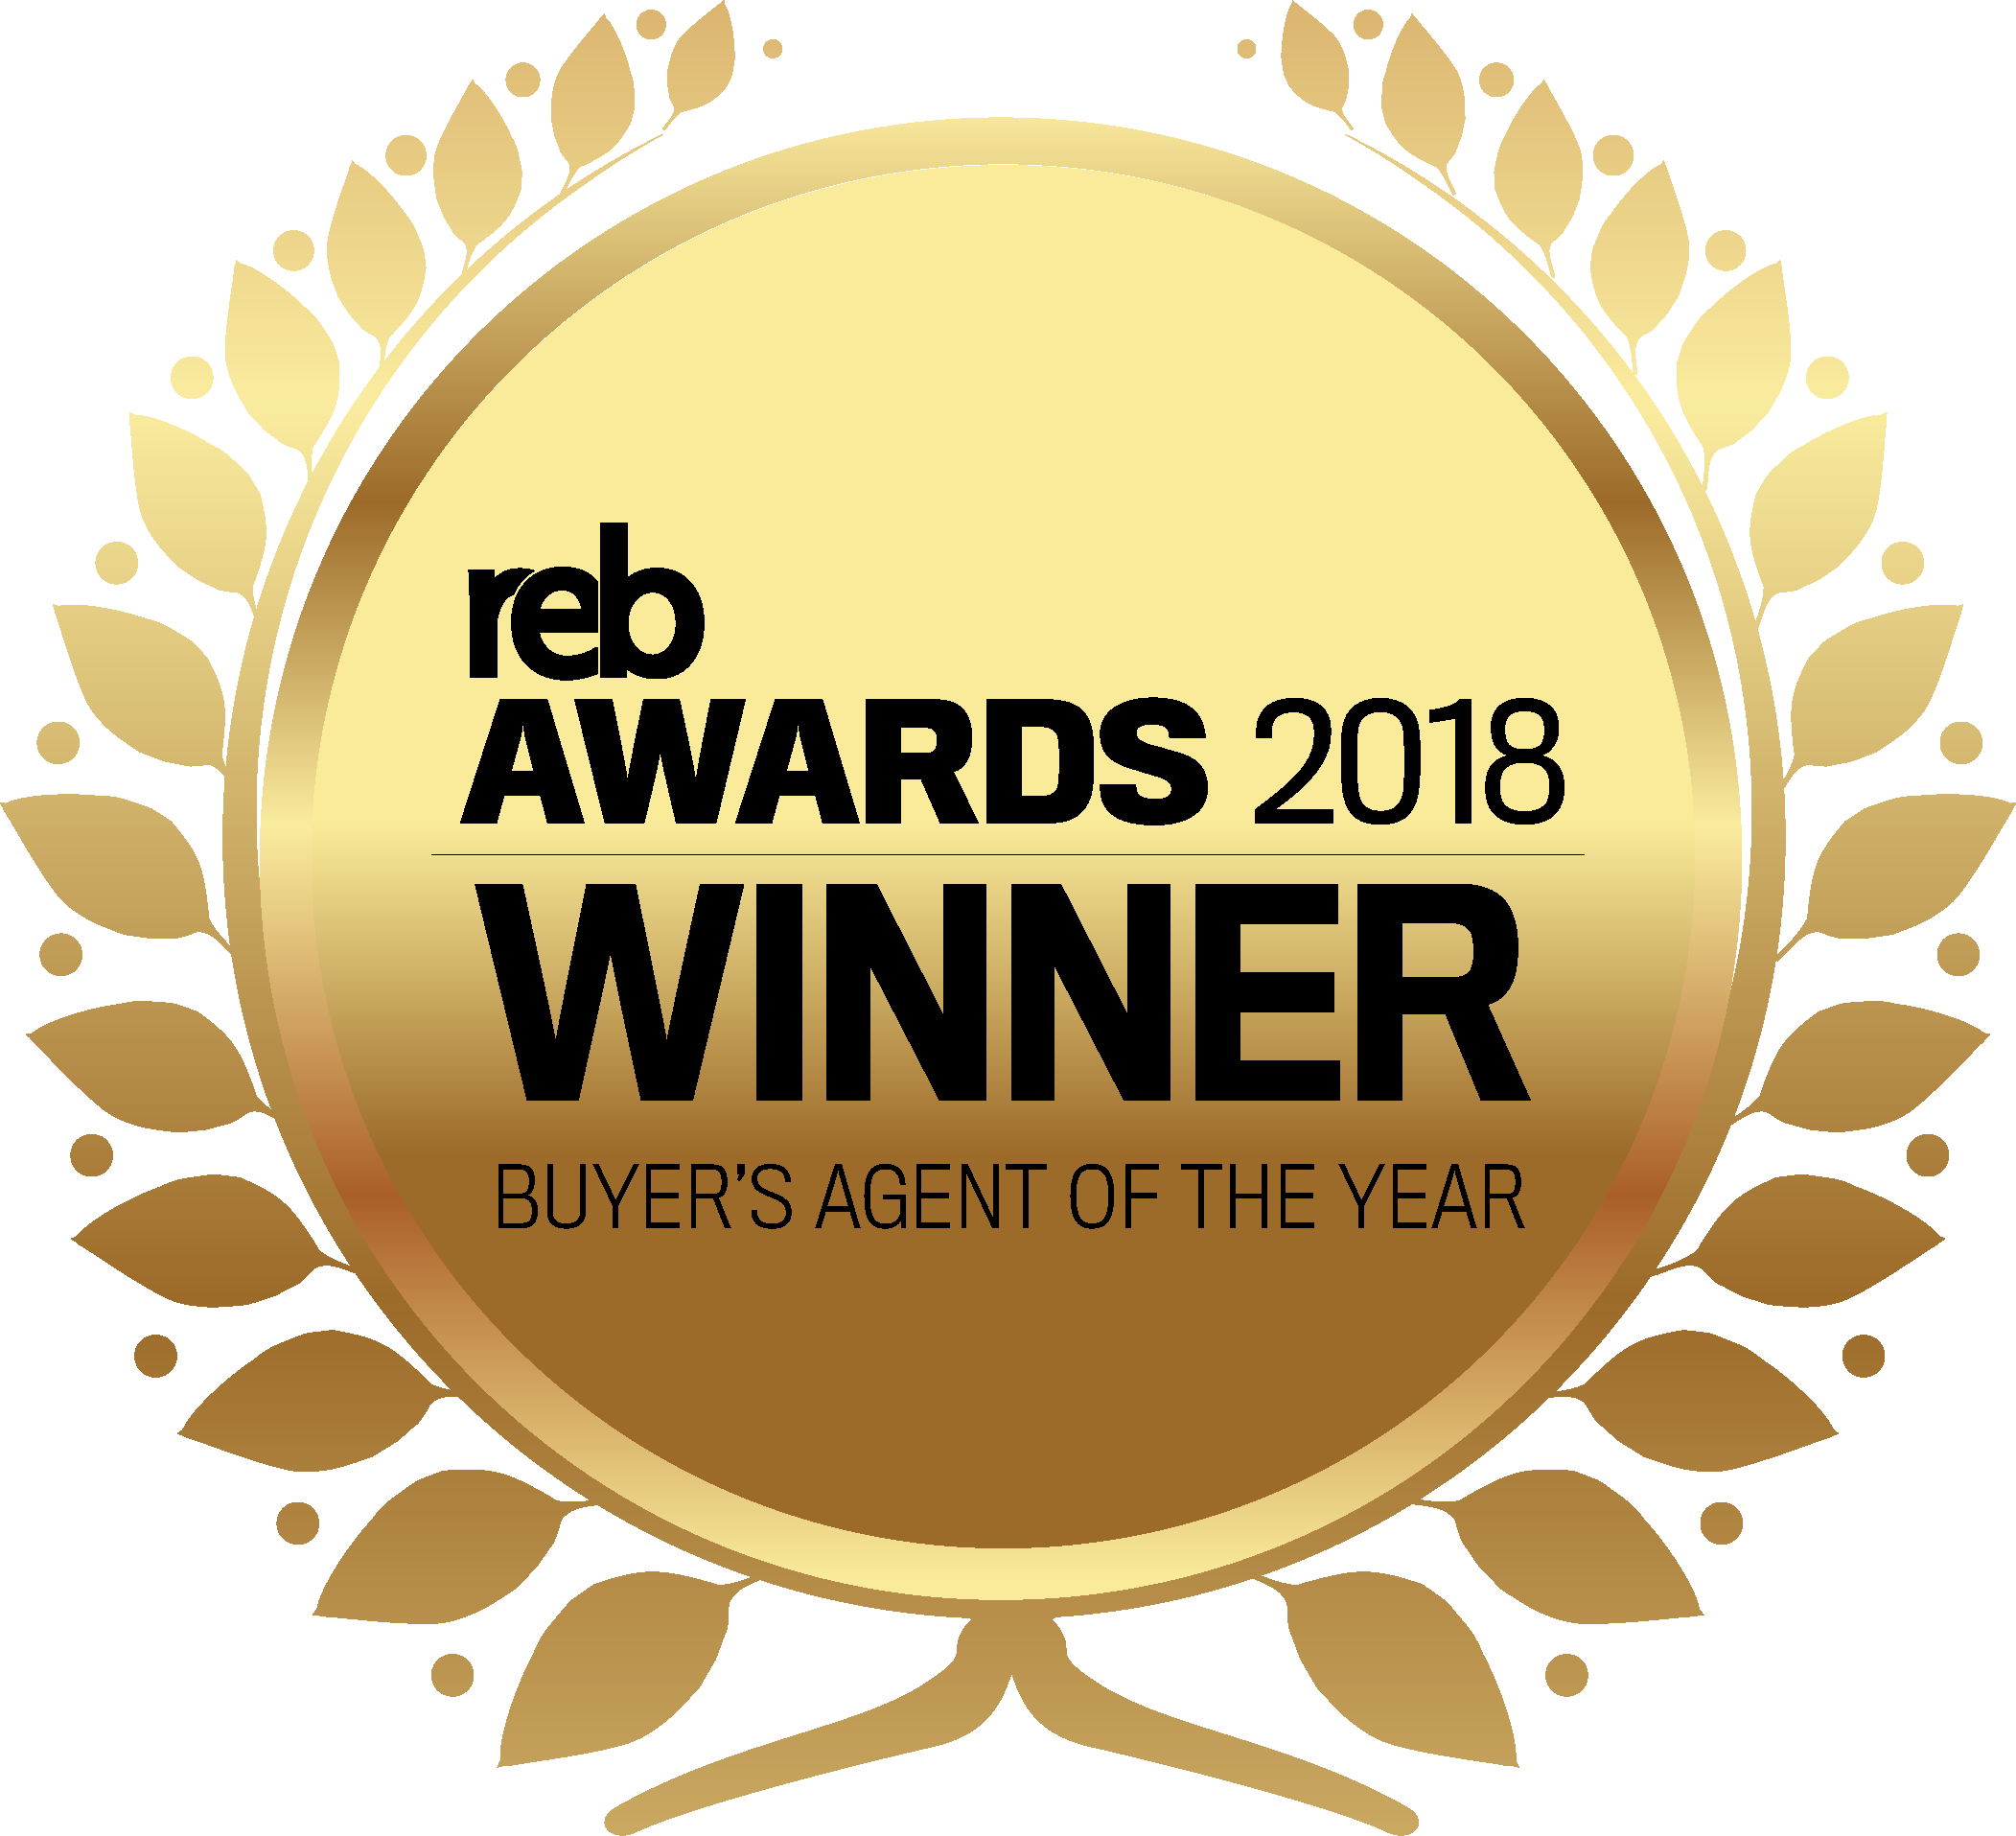 Winner – 2018 Award for Buyers' Agent of the Year REB Awards 2018